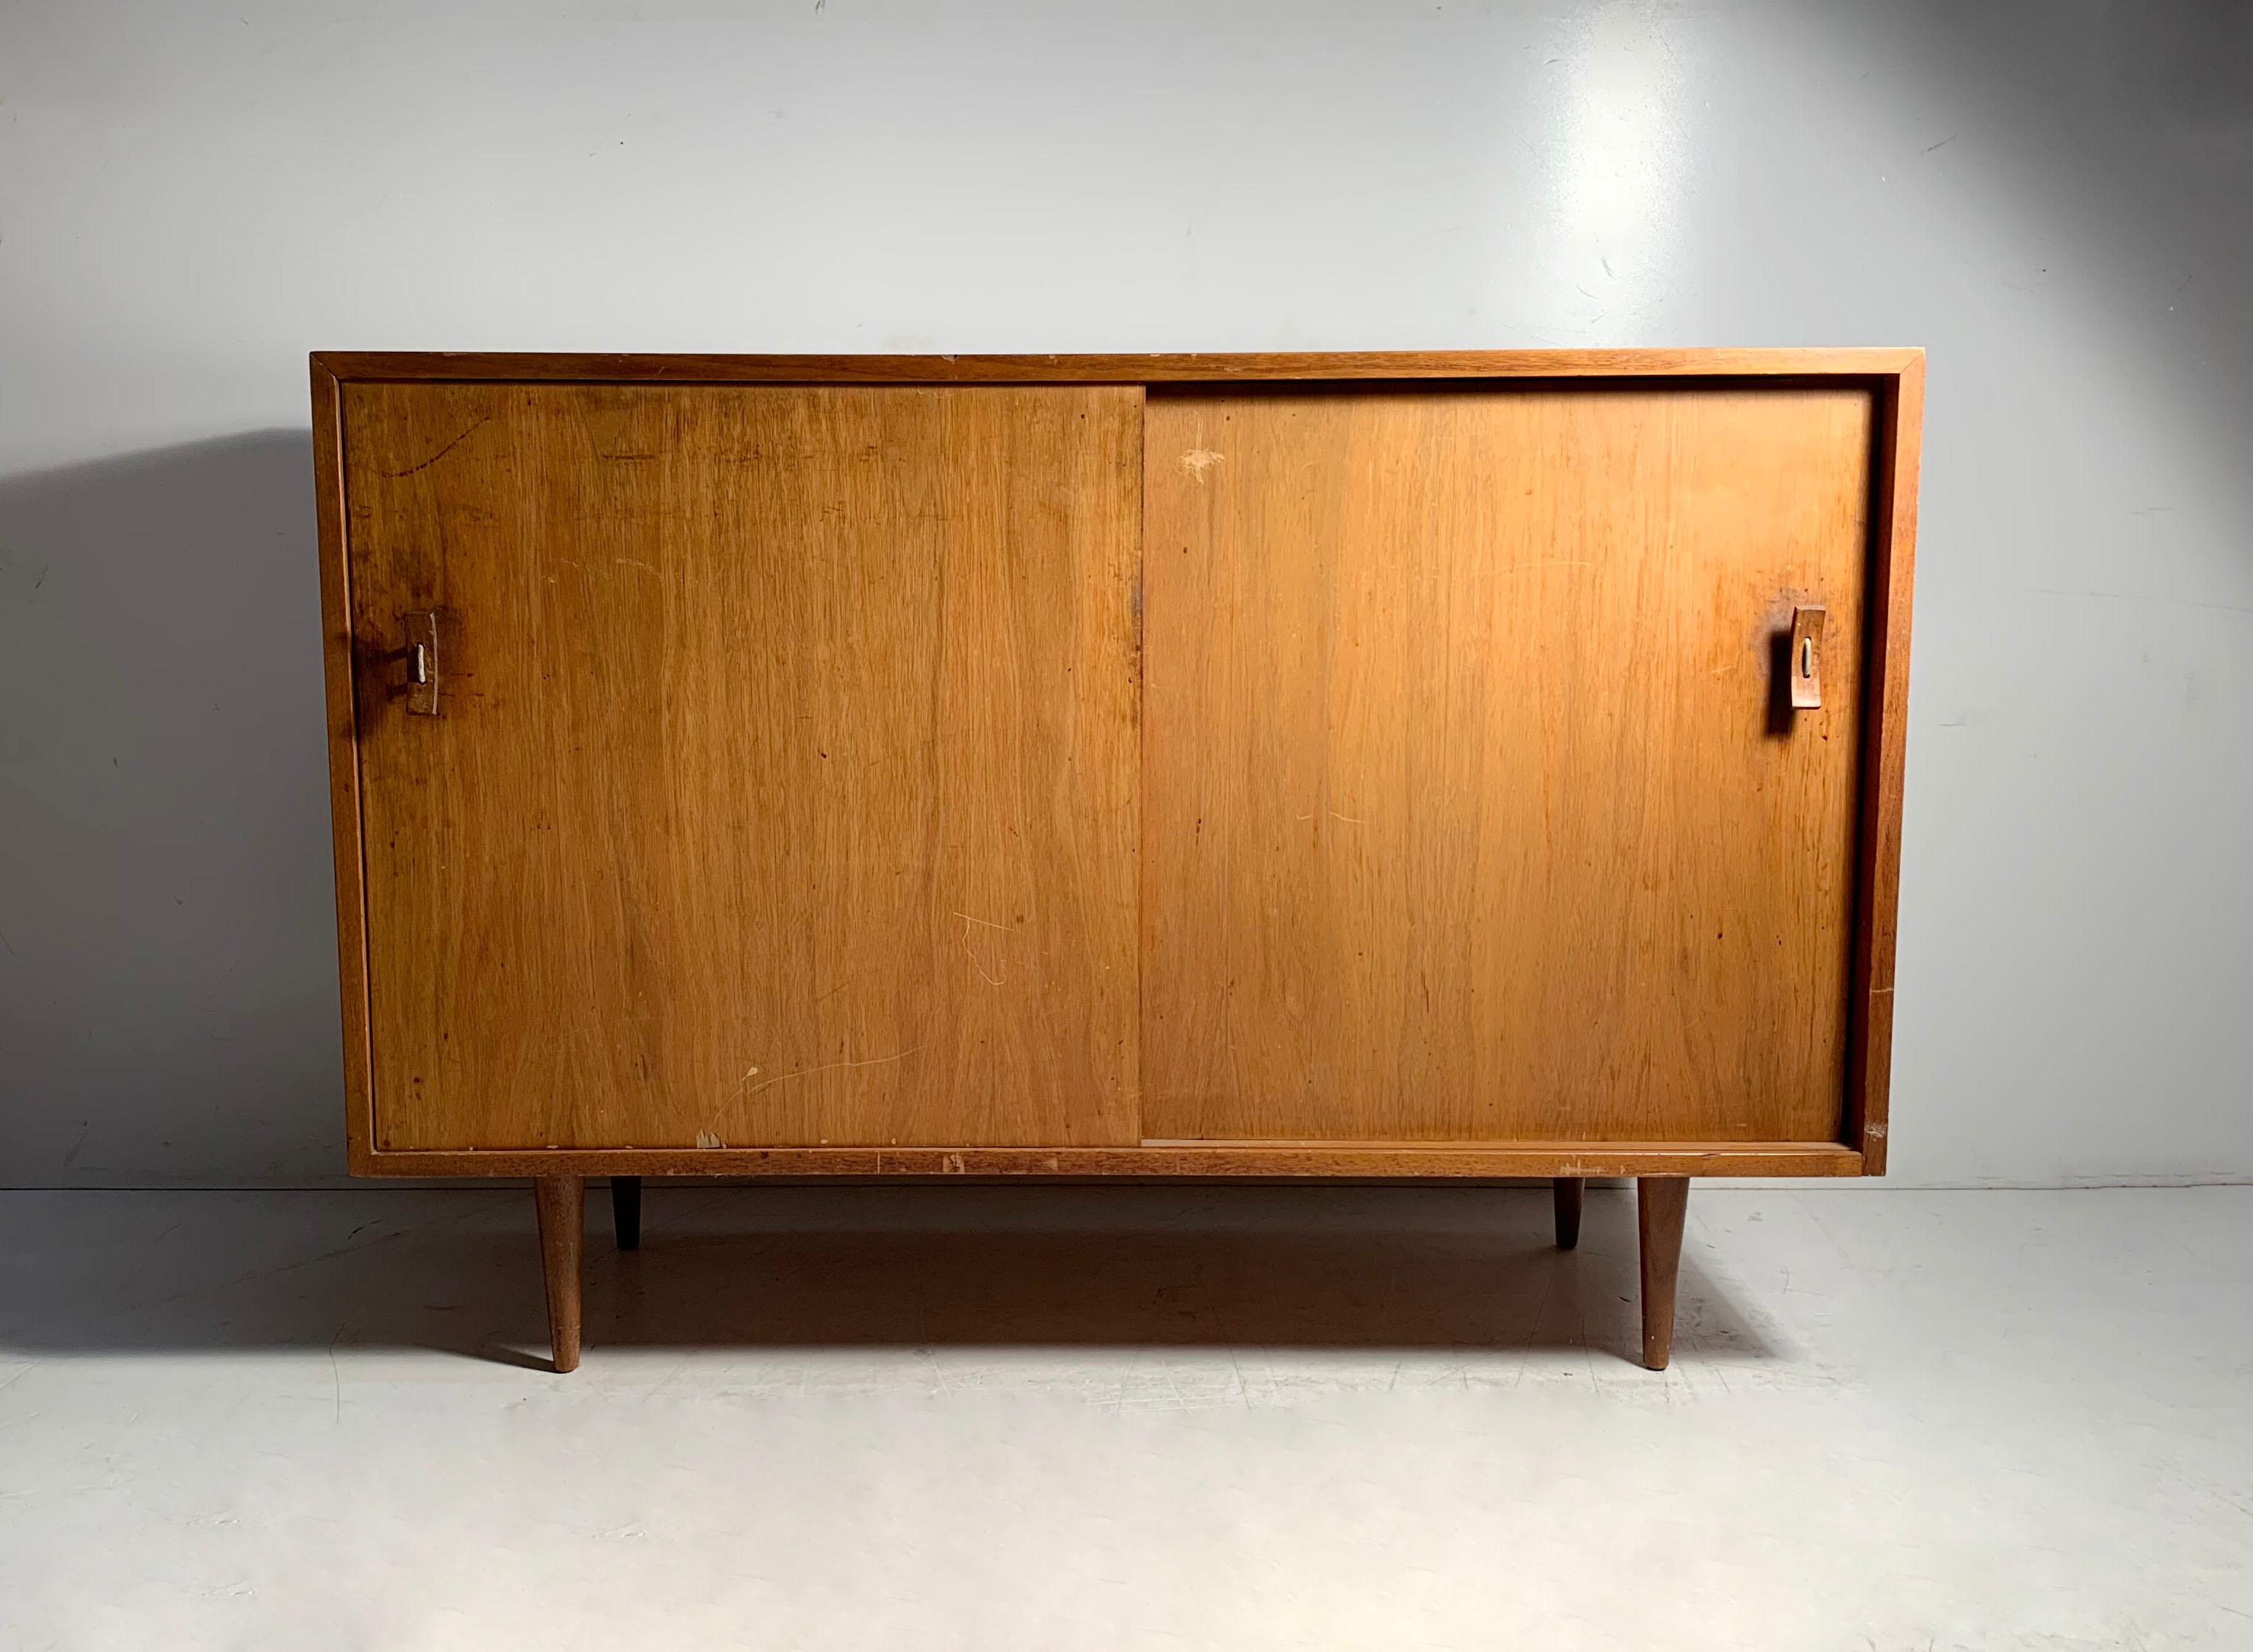 Glenn of California vintage sideboard cabinet by Stanley Young. Great scale and proportion. Works well in both larger and smaller interiors. Original red paint on interior drawers. Beautiful grain to wood. Stanley Young's signature handles.

In the